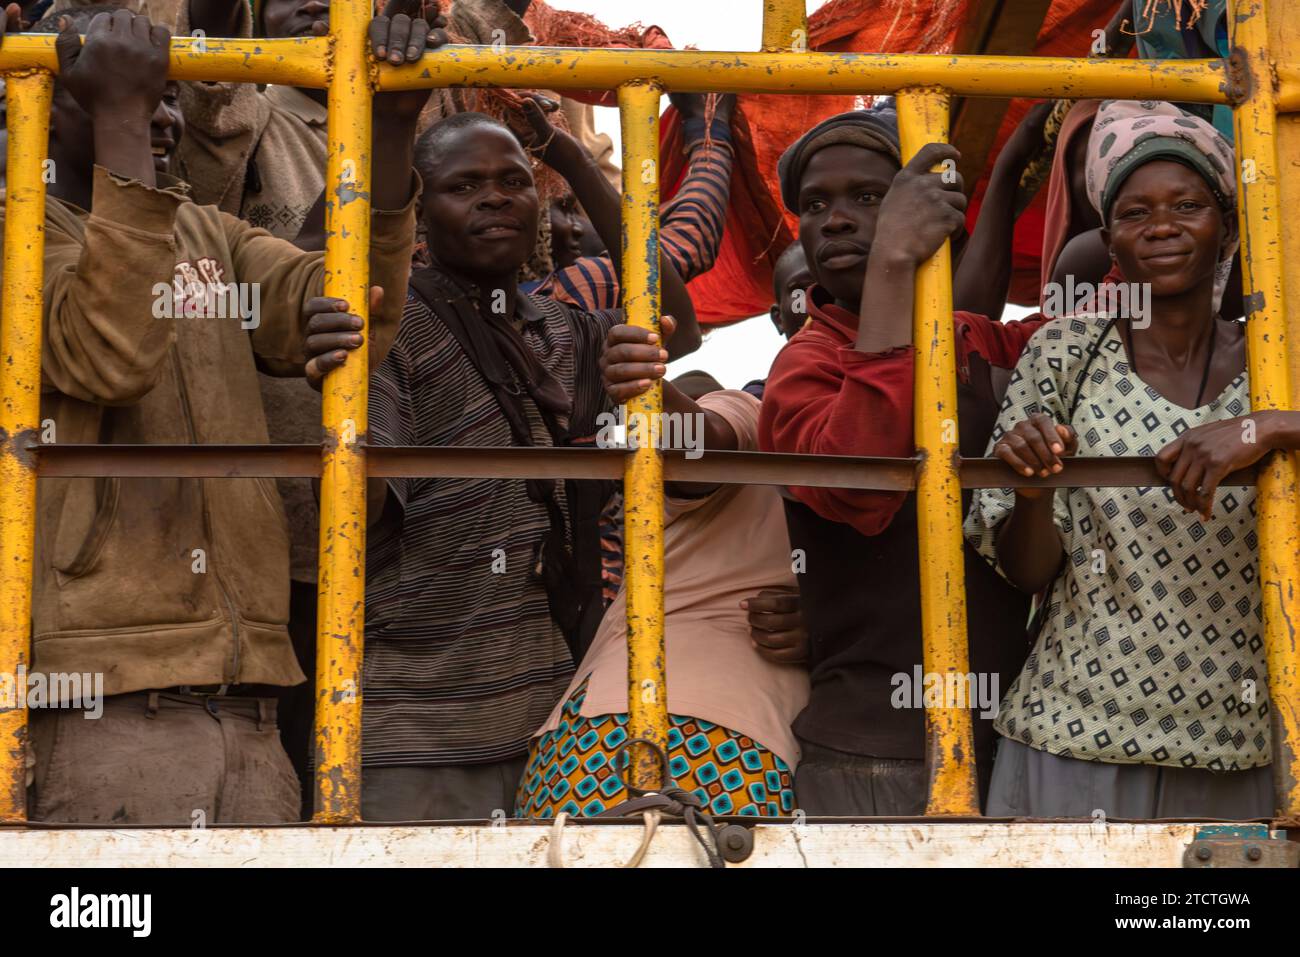 Workers back from the sugar cane plantation after a work day Stock Photo